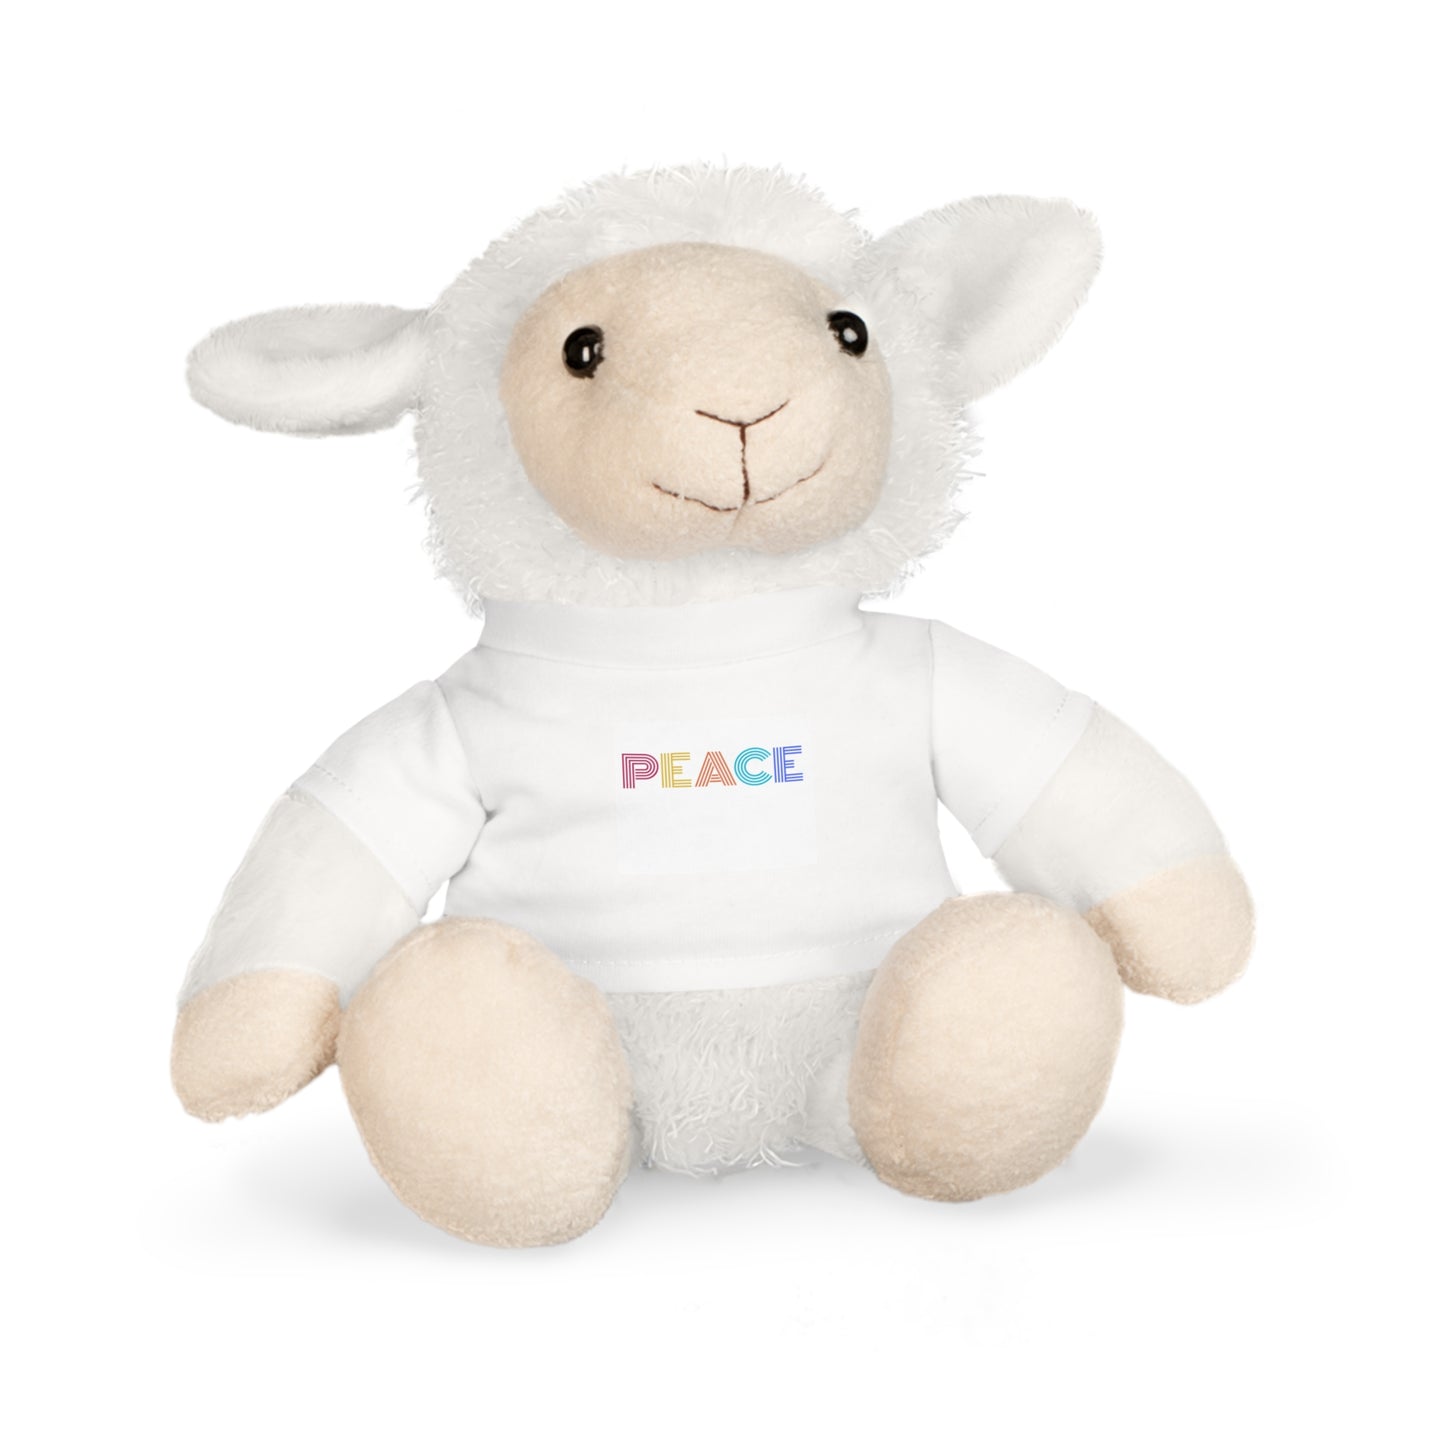 Plush Toy with PEACE Shirt